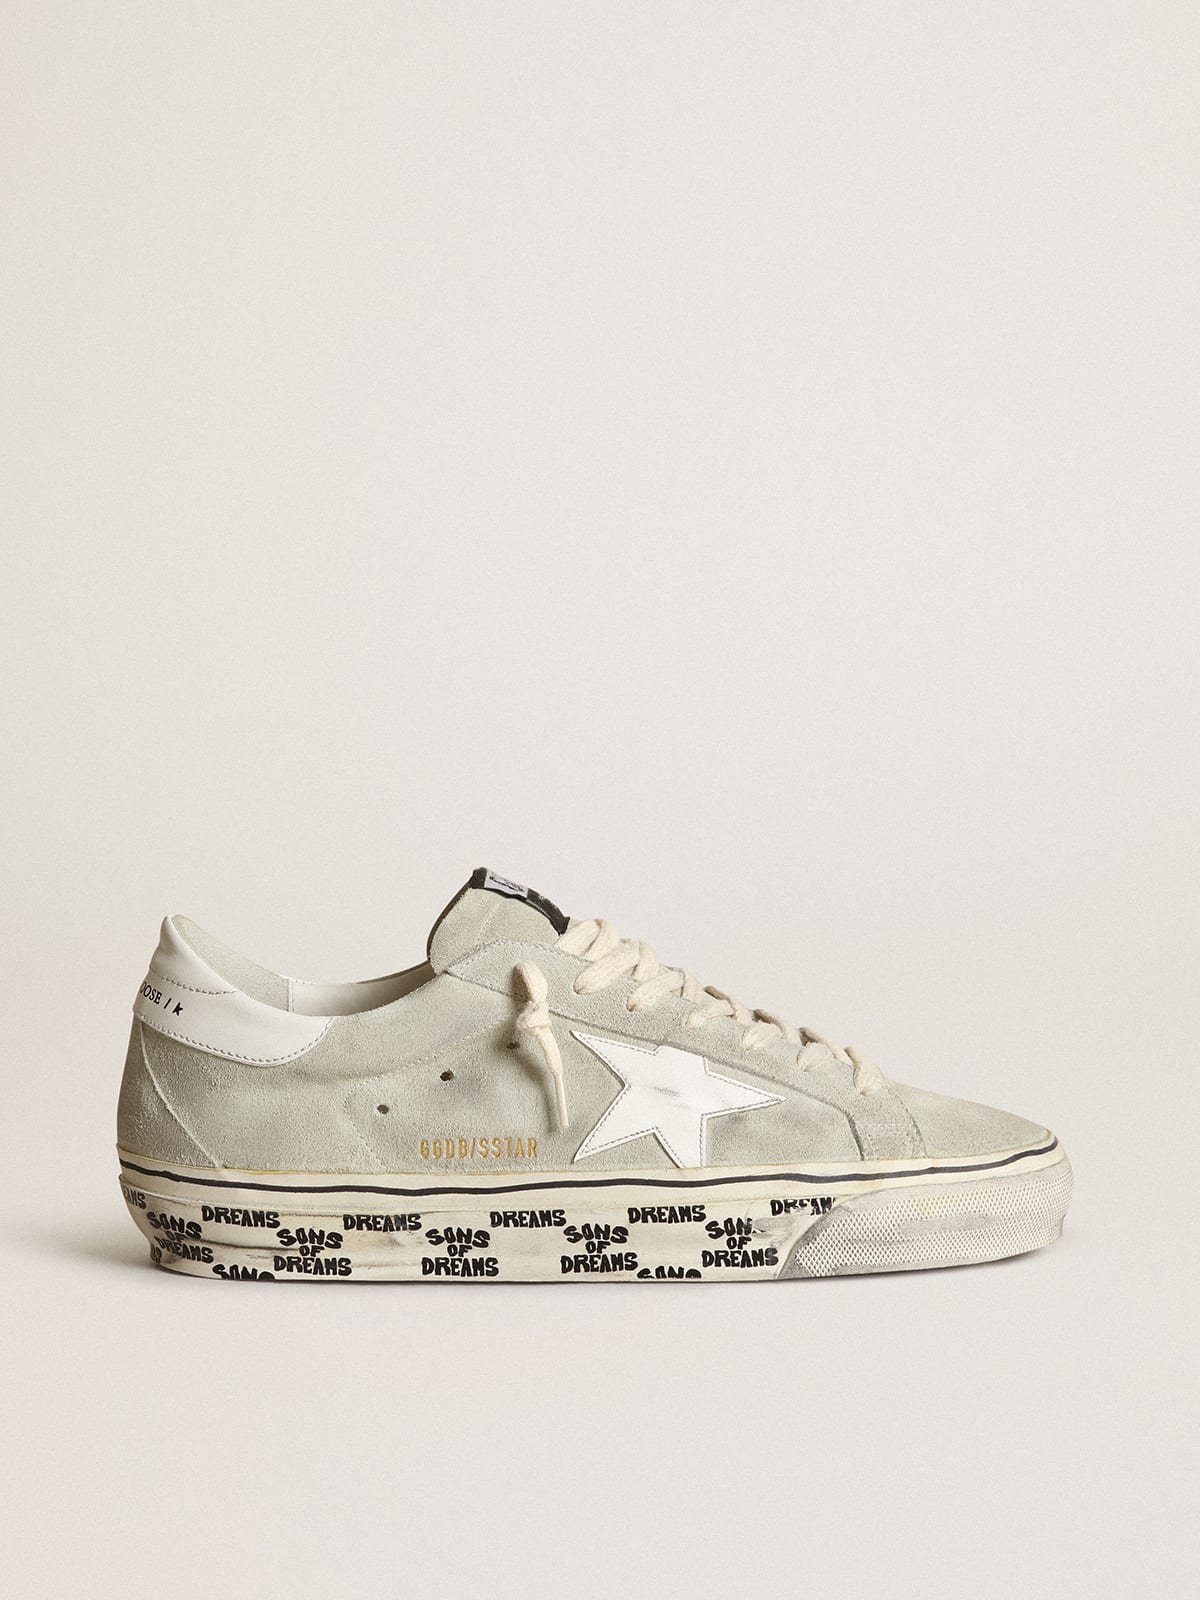 Super-Star sneakers in ice-gray suede with white leather star and heel tab